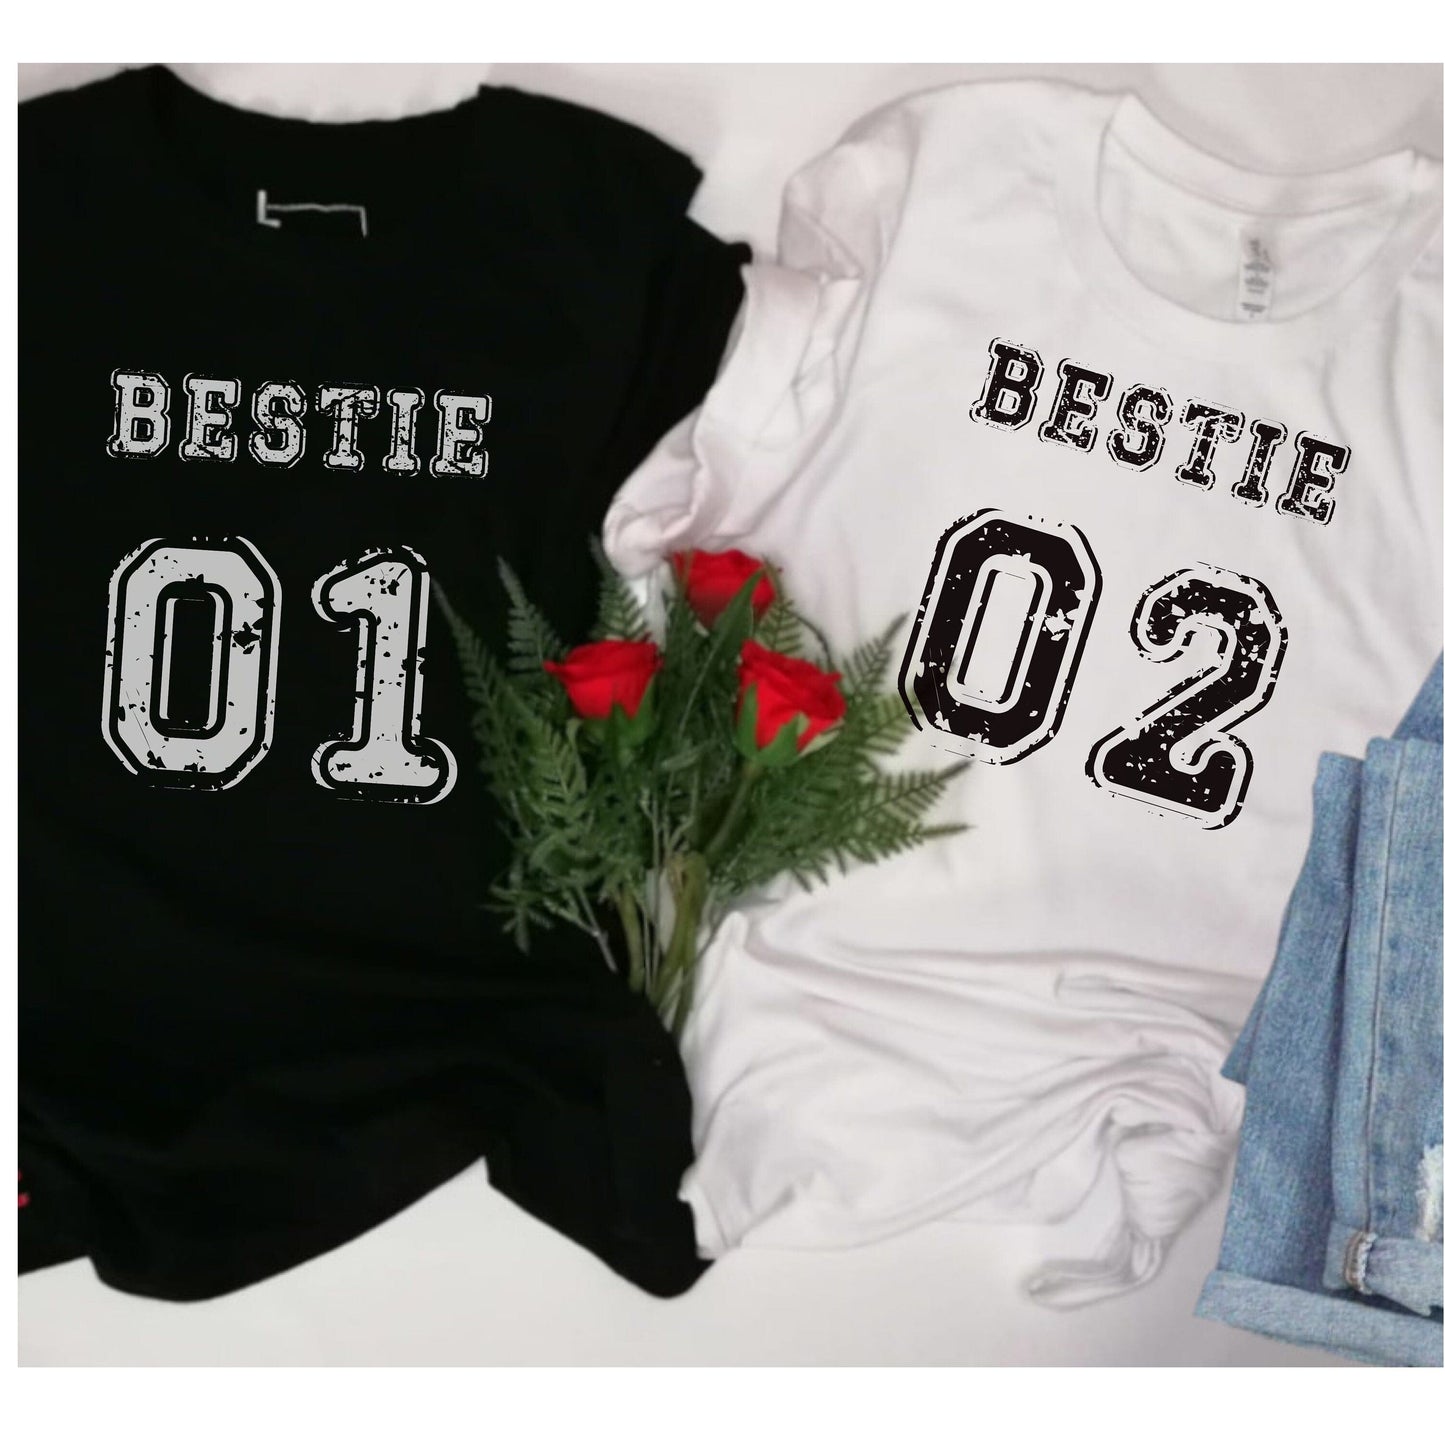 Middy Tees Canada shirts Bachelorette Party T-Shirts | Bride and Bestie